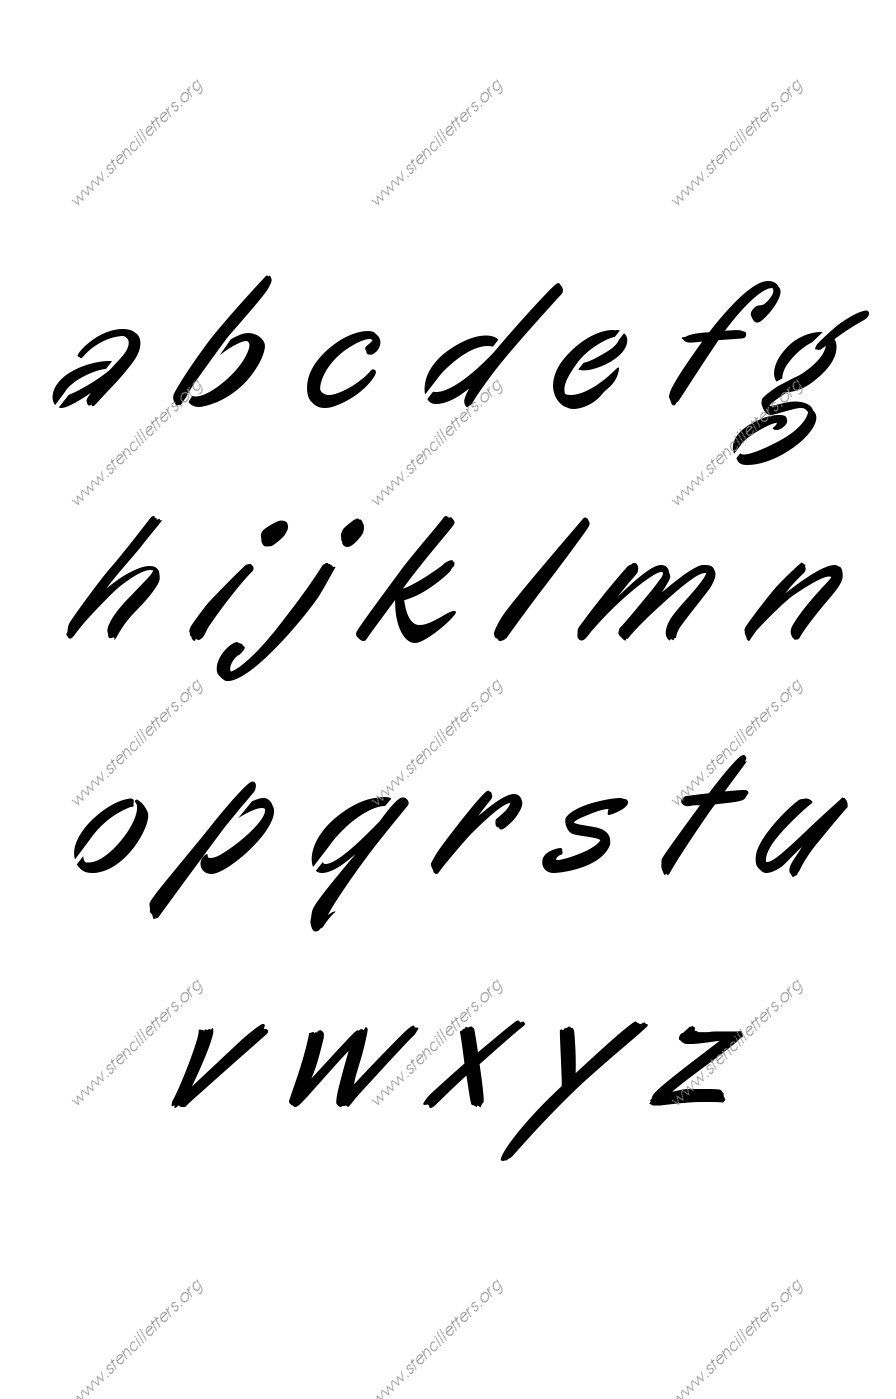 Calligraphic Italic A to Z lowercase letter stencils